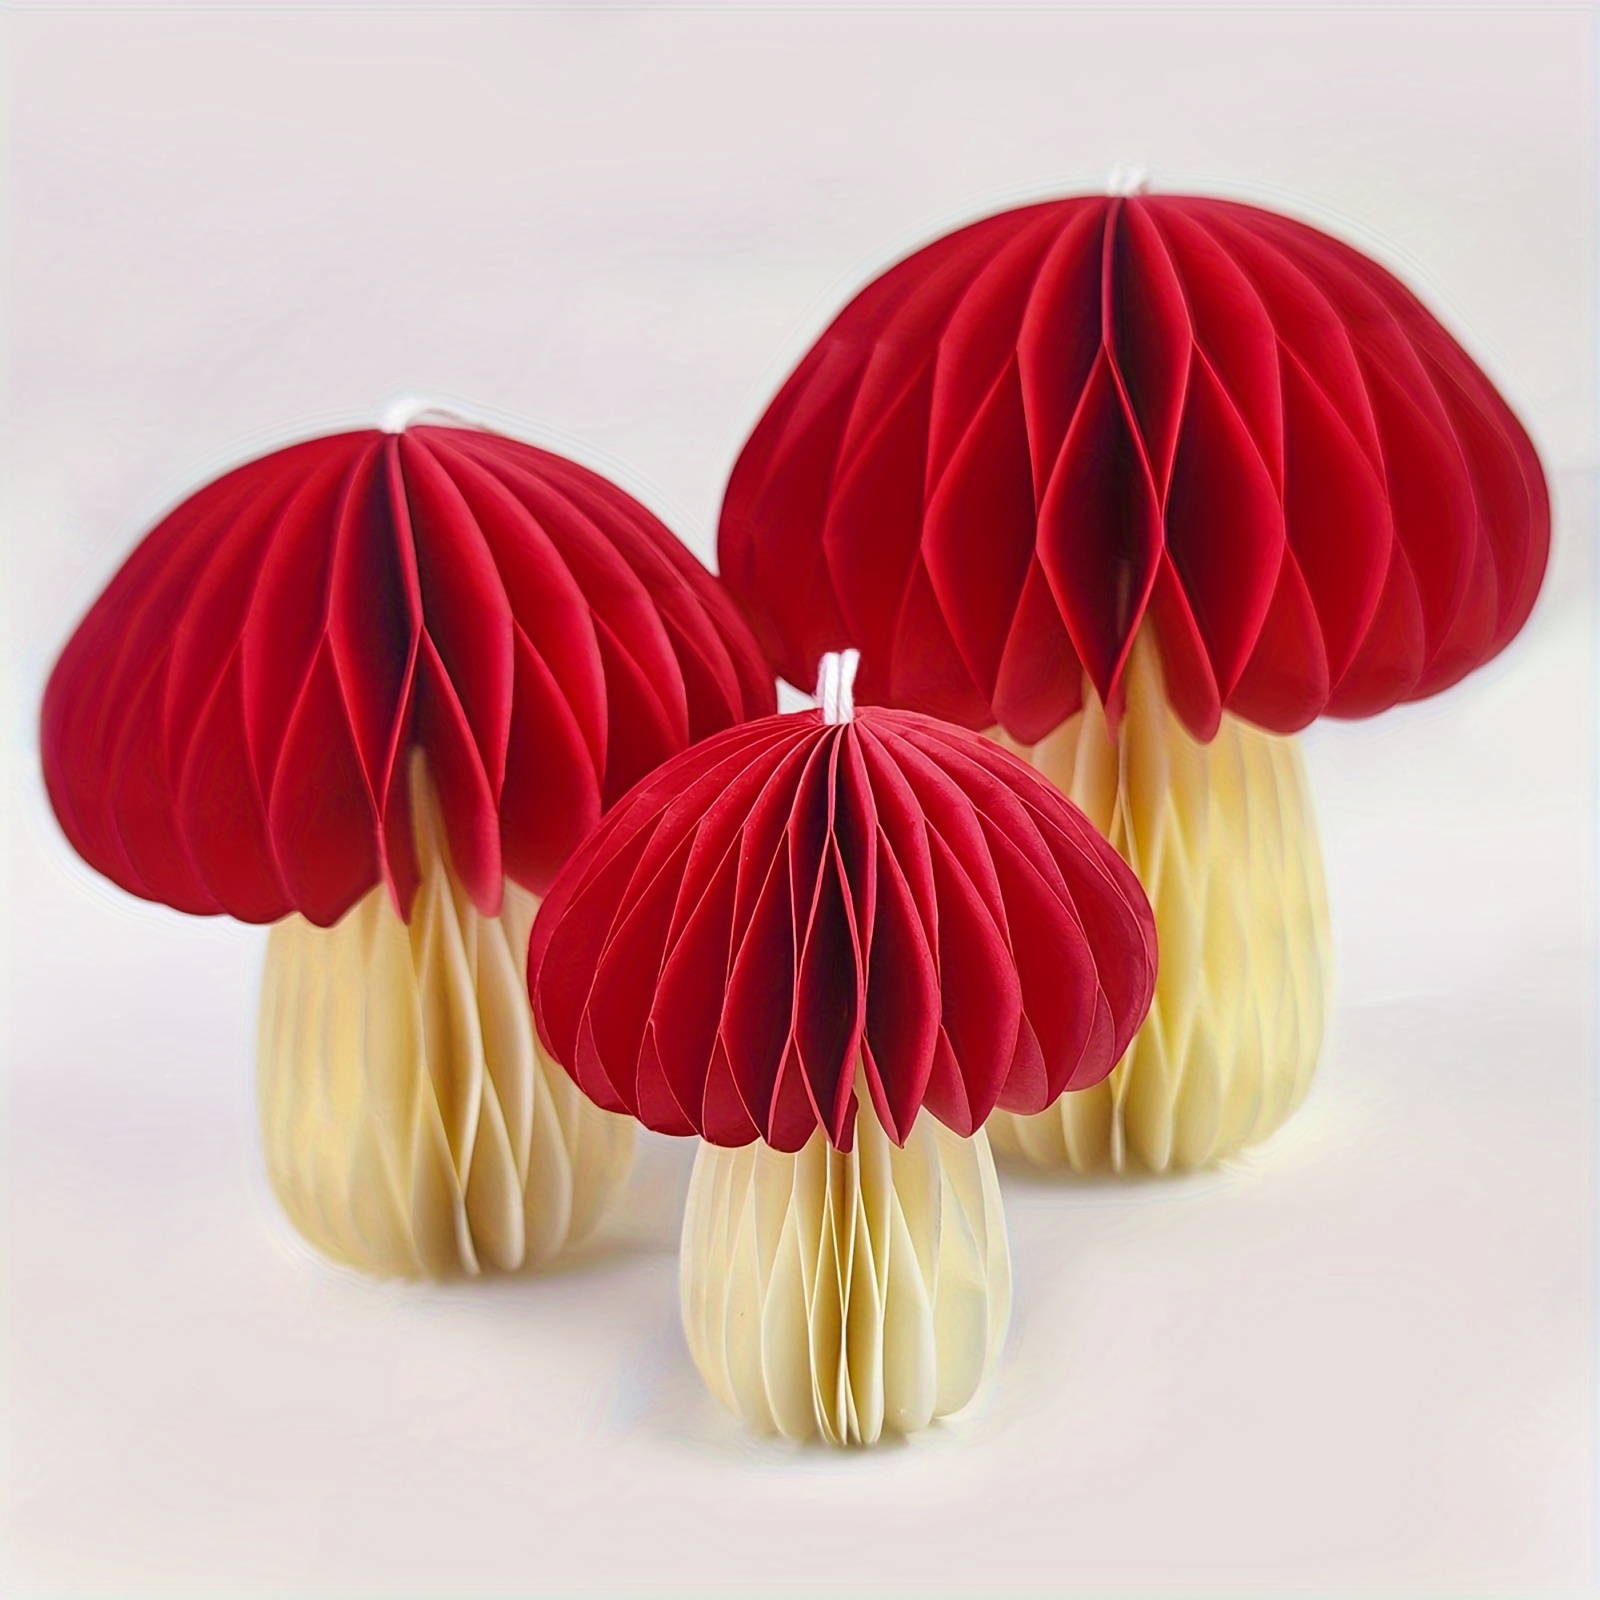 

3pcs Mushroom Party Decorations Hanging Décor Red Thick Paper Mushroom Theme Honeycomb Ball Pendant Ornament For Christmas Tree New Year Birthday Wedding Home Garden